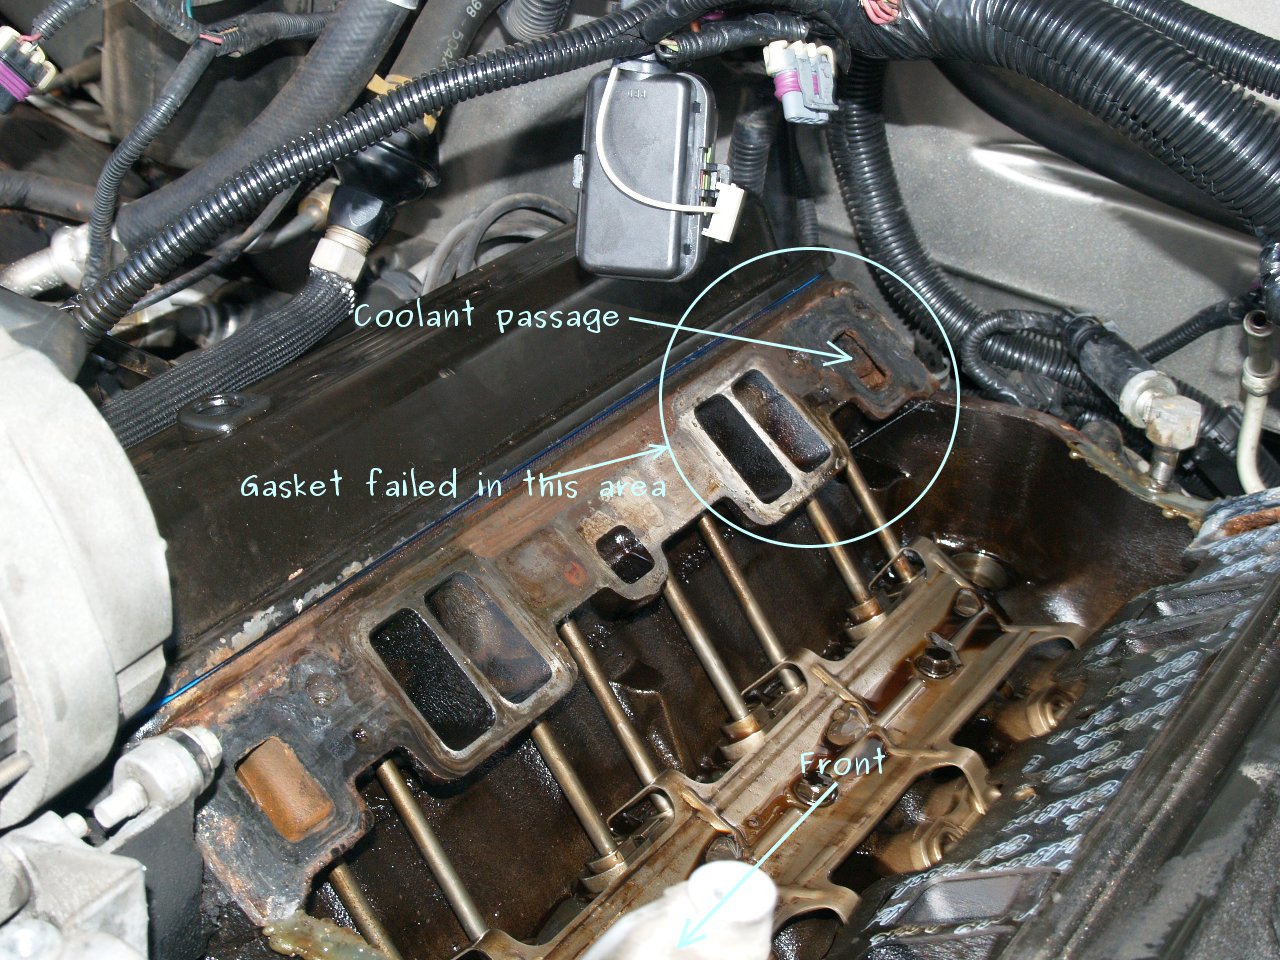 See P0873 in engine